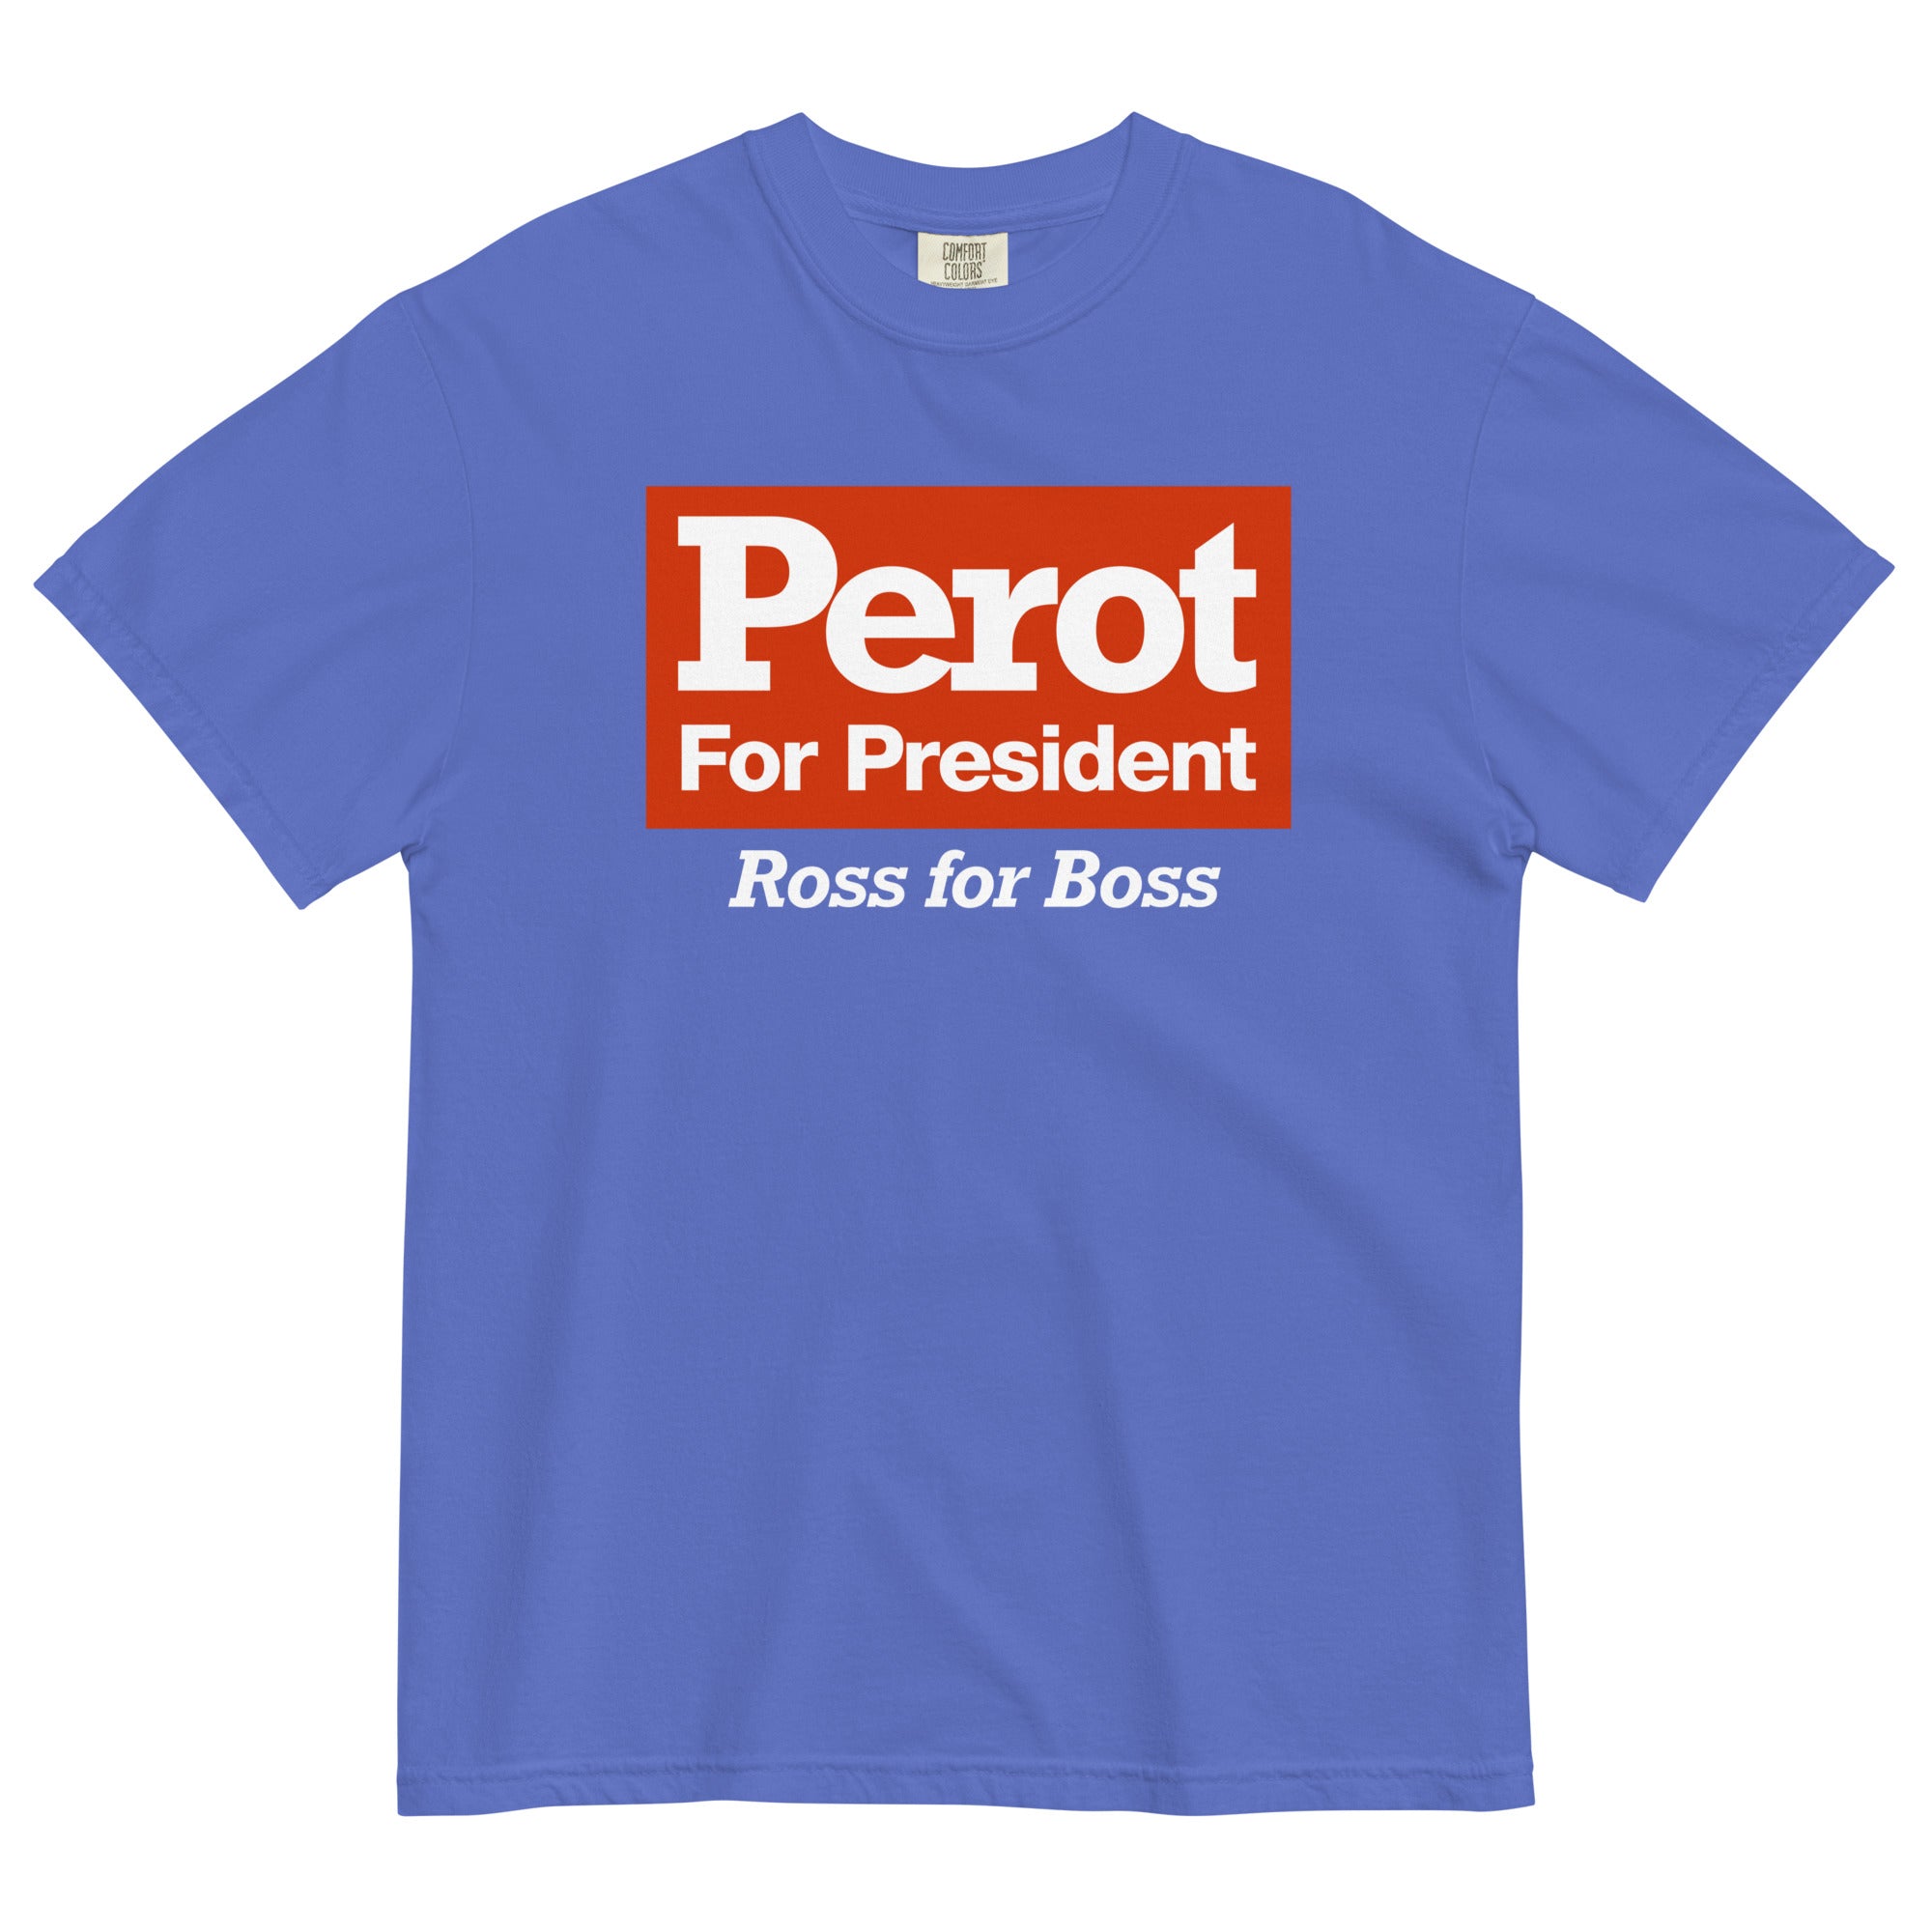 Ross Perot 1992 Campaign Reproduction Garment-Dyed Heavyweight T-Shirt